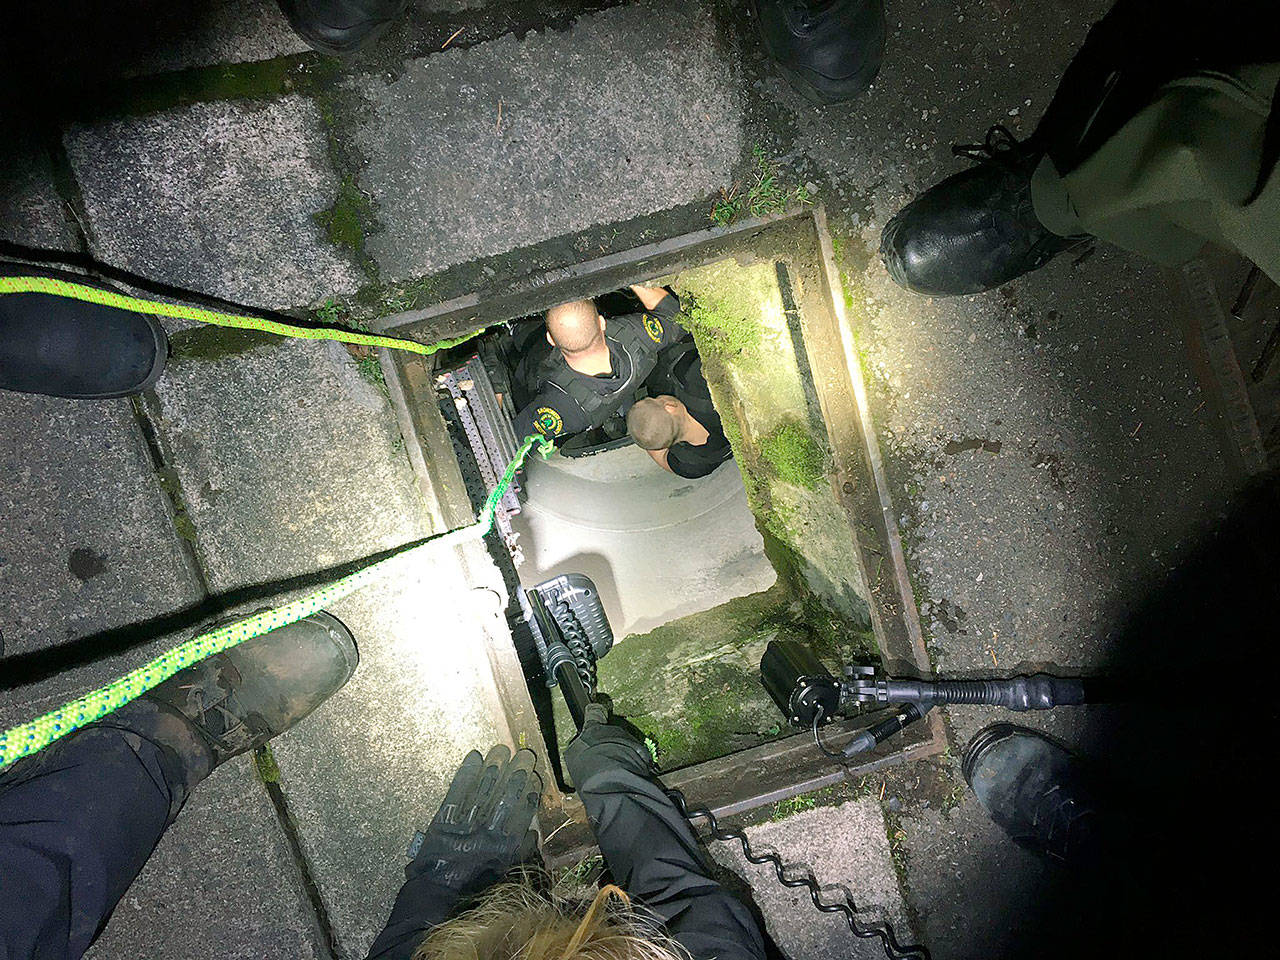 A man allegedly involved in a burglary fled law enforcement and hid in a stormwater pond retention pipe Monday in Lake Stevens. Deputies found and arrested him. (Snohomish County Sheriff’s Office)